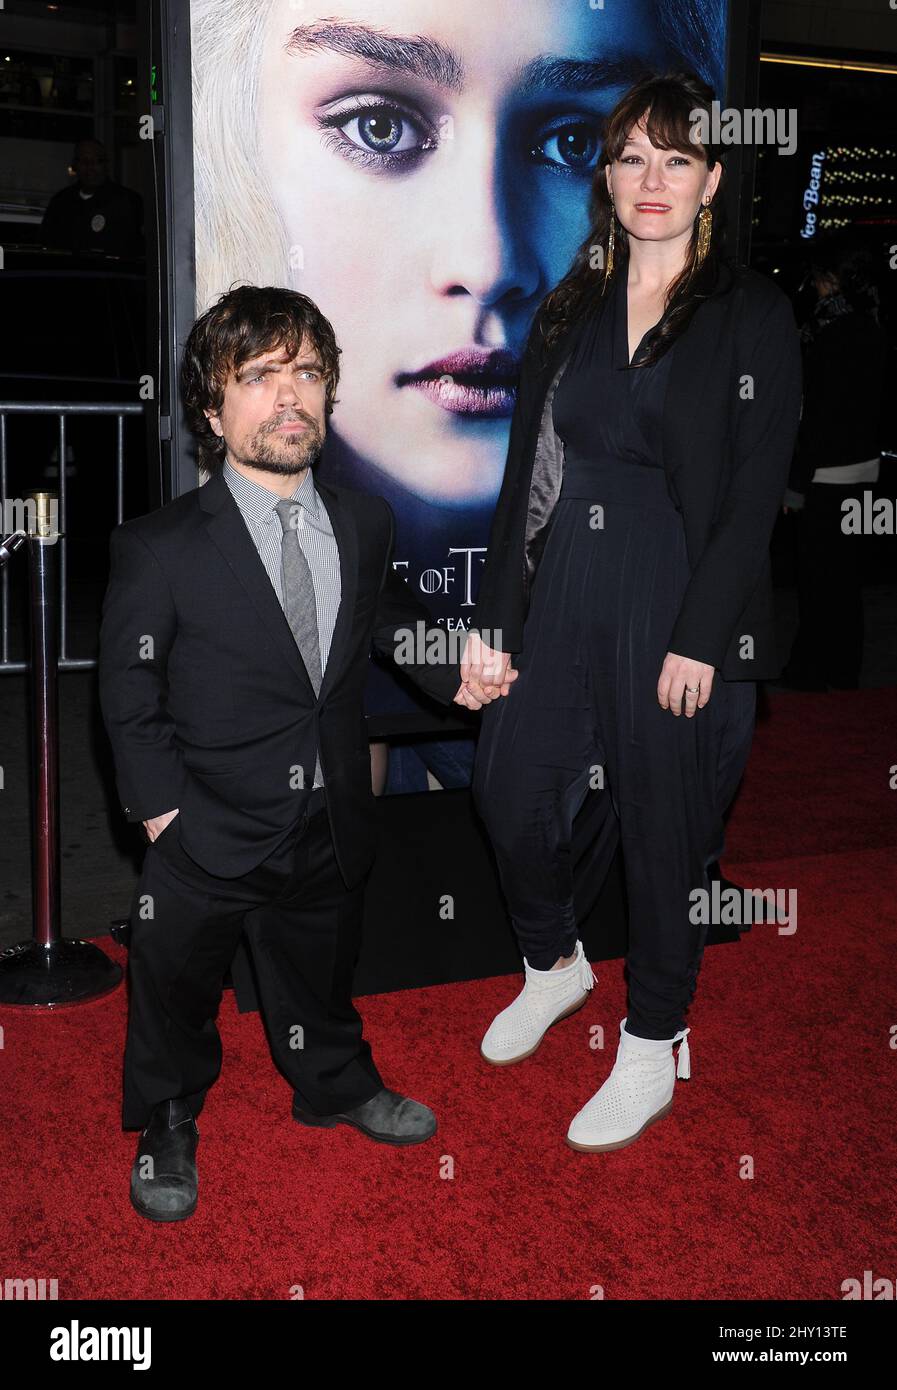 Peter Dinklage and Erica Schmidt attending the season 3 premiere of the show 'Game Of Thrones' in Hollywood, California. Stock Photo